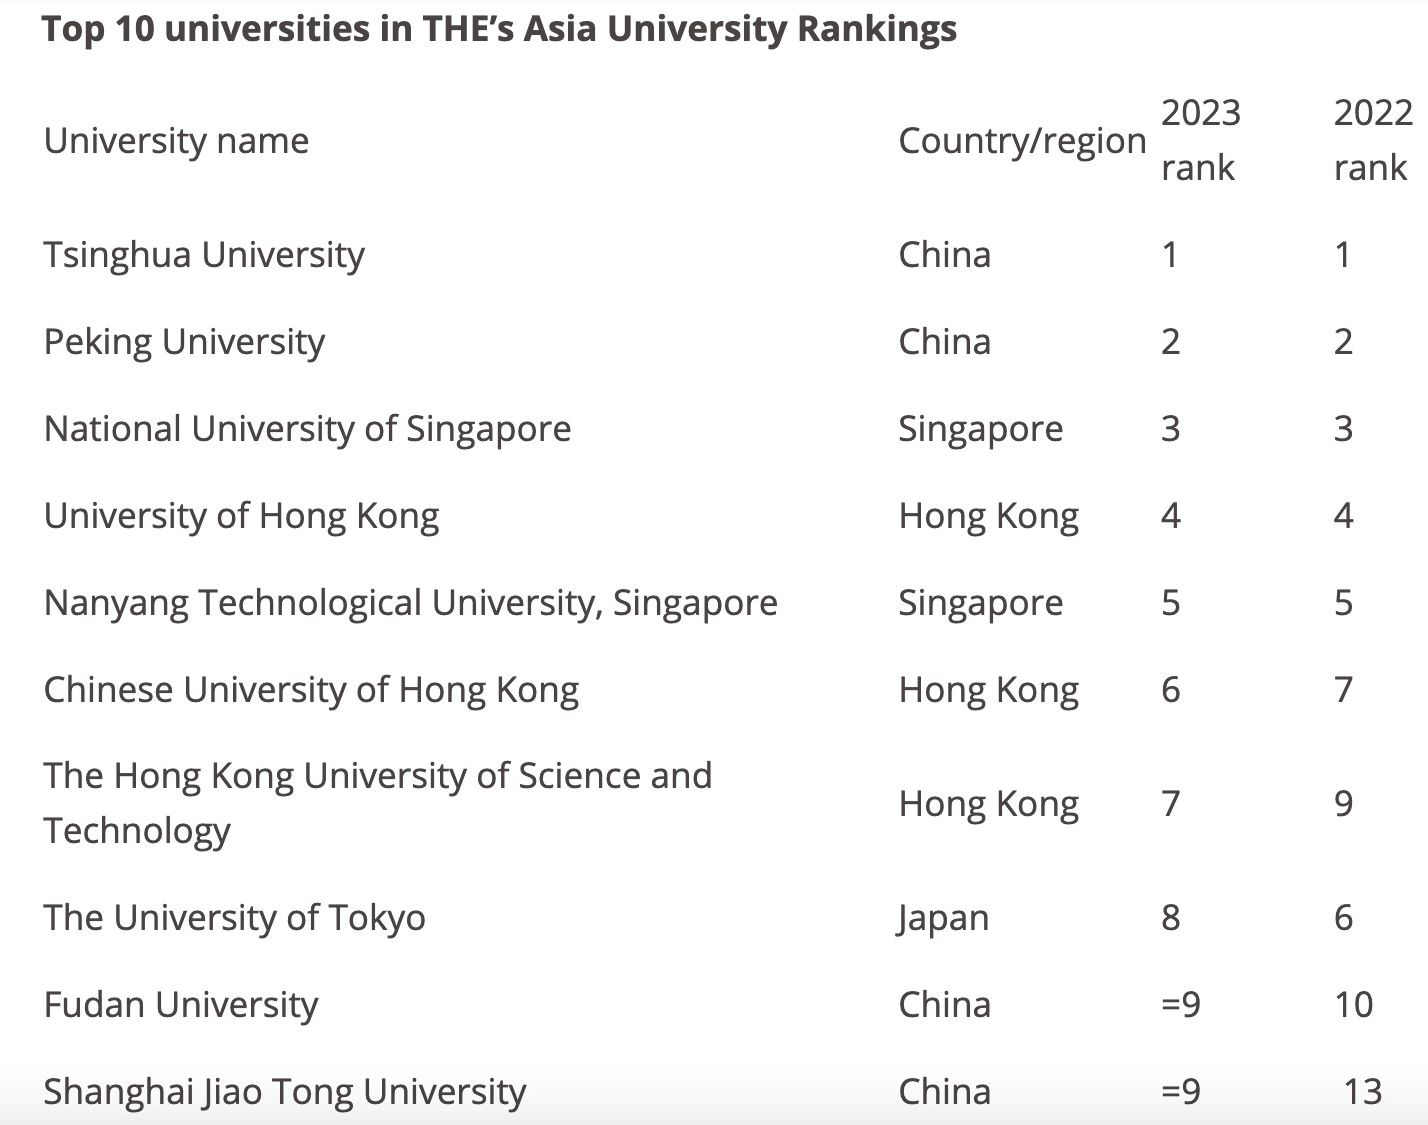 The Top 10 universities in the Times Higher Education's Asia University rankings. 